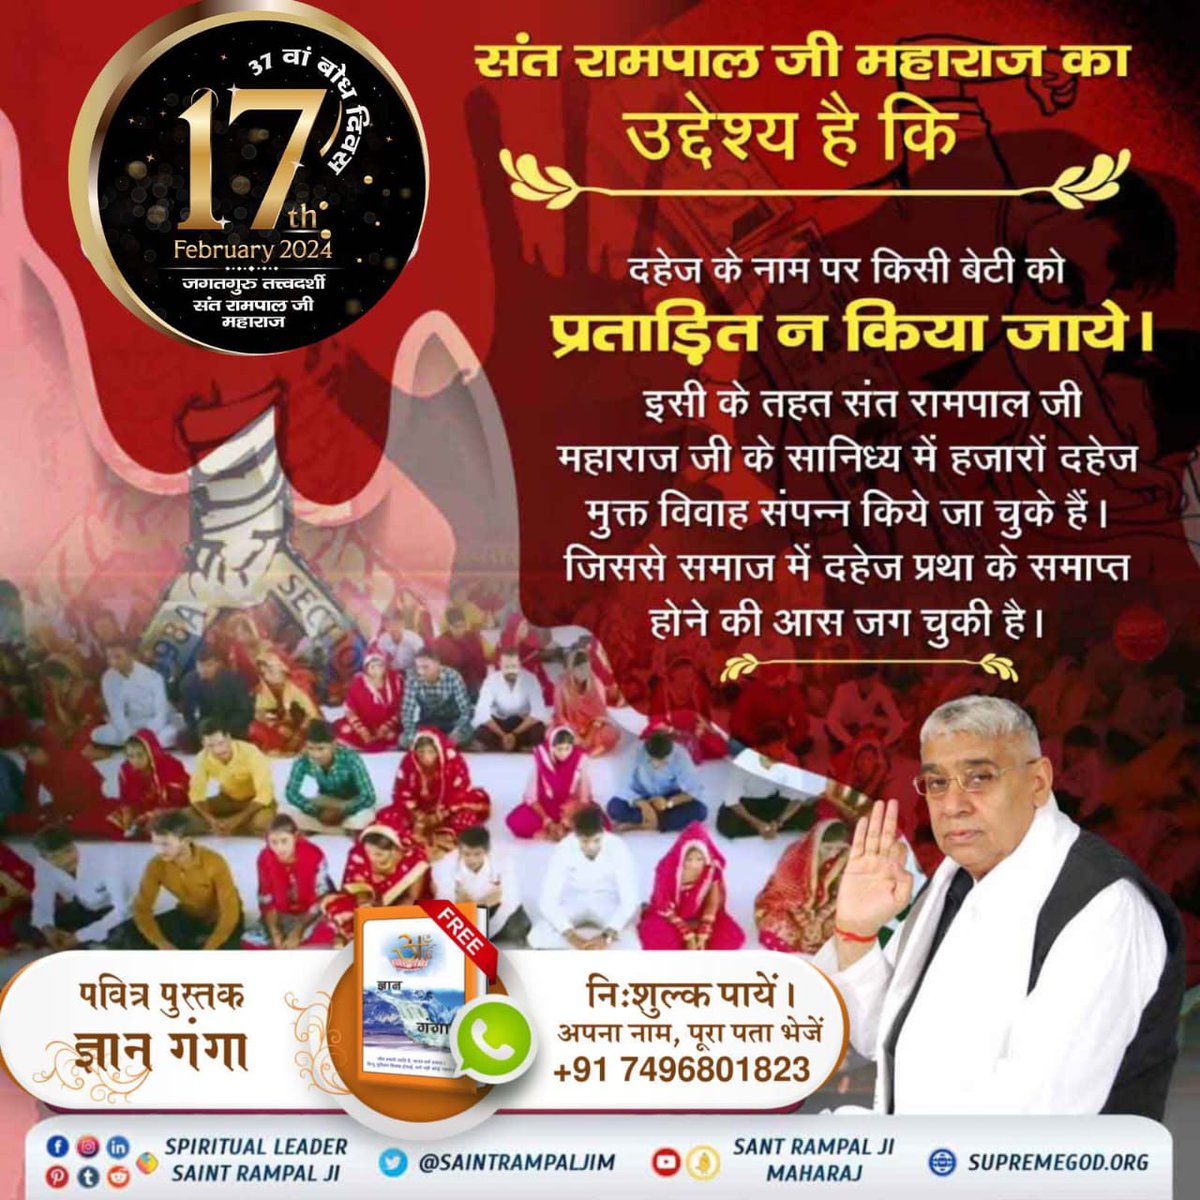 #TheMission_Of_SantRampalJi The aim of sant rampal ji Maharaj ji is to make India drug free. He says alcohol and other intoxicants apart from being social evils are a detriment in the path of worship. 7Days Left For Bodh Diwas